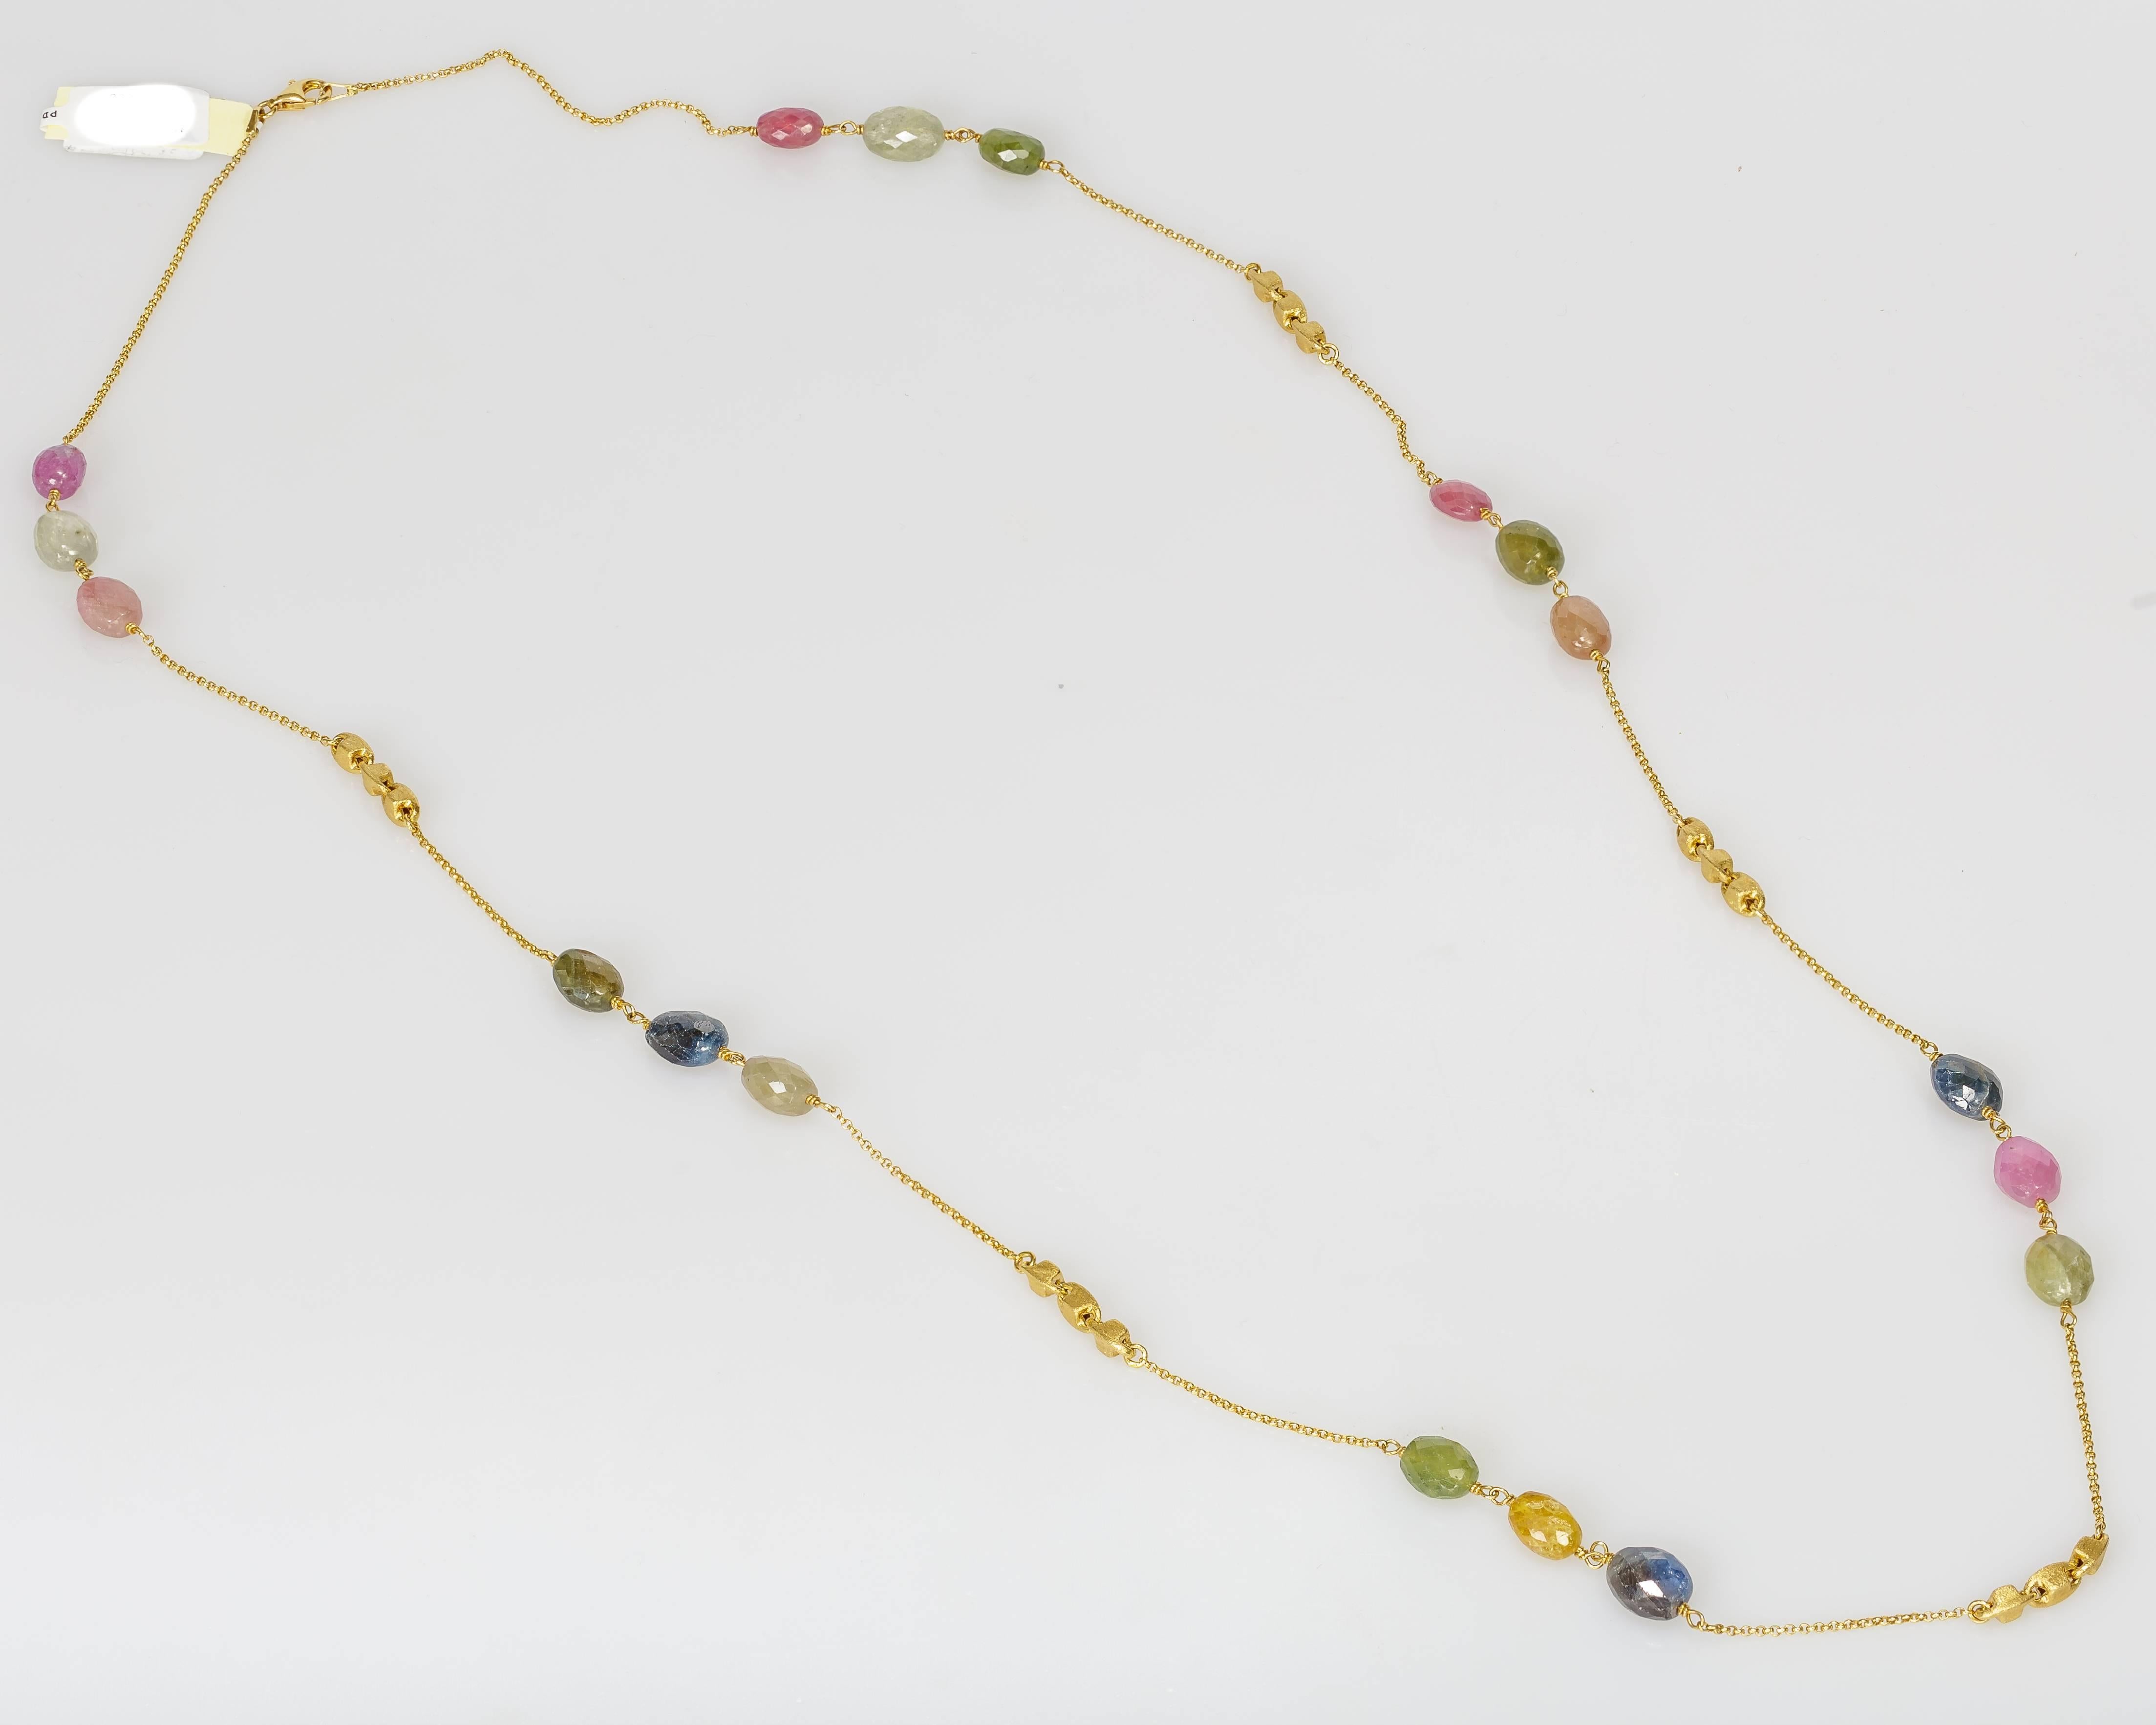 This Yvel necklace features 93.00 ct. of natural fancy colored rose cut sapphire beads linked by a 32 inch 18k yellow gold chain. It can be worn long, or doubled (see photos). 